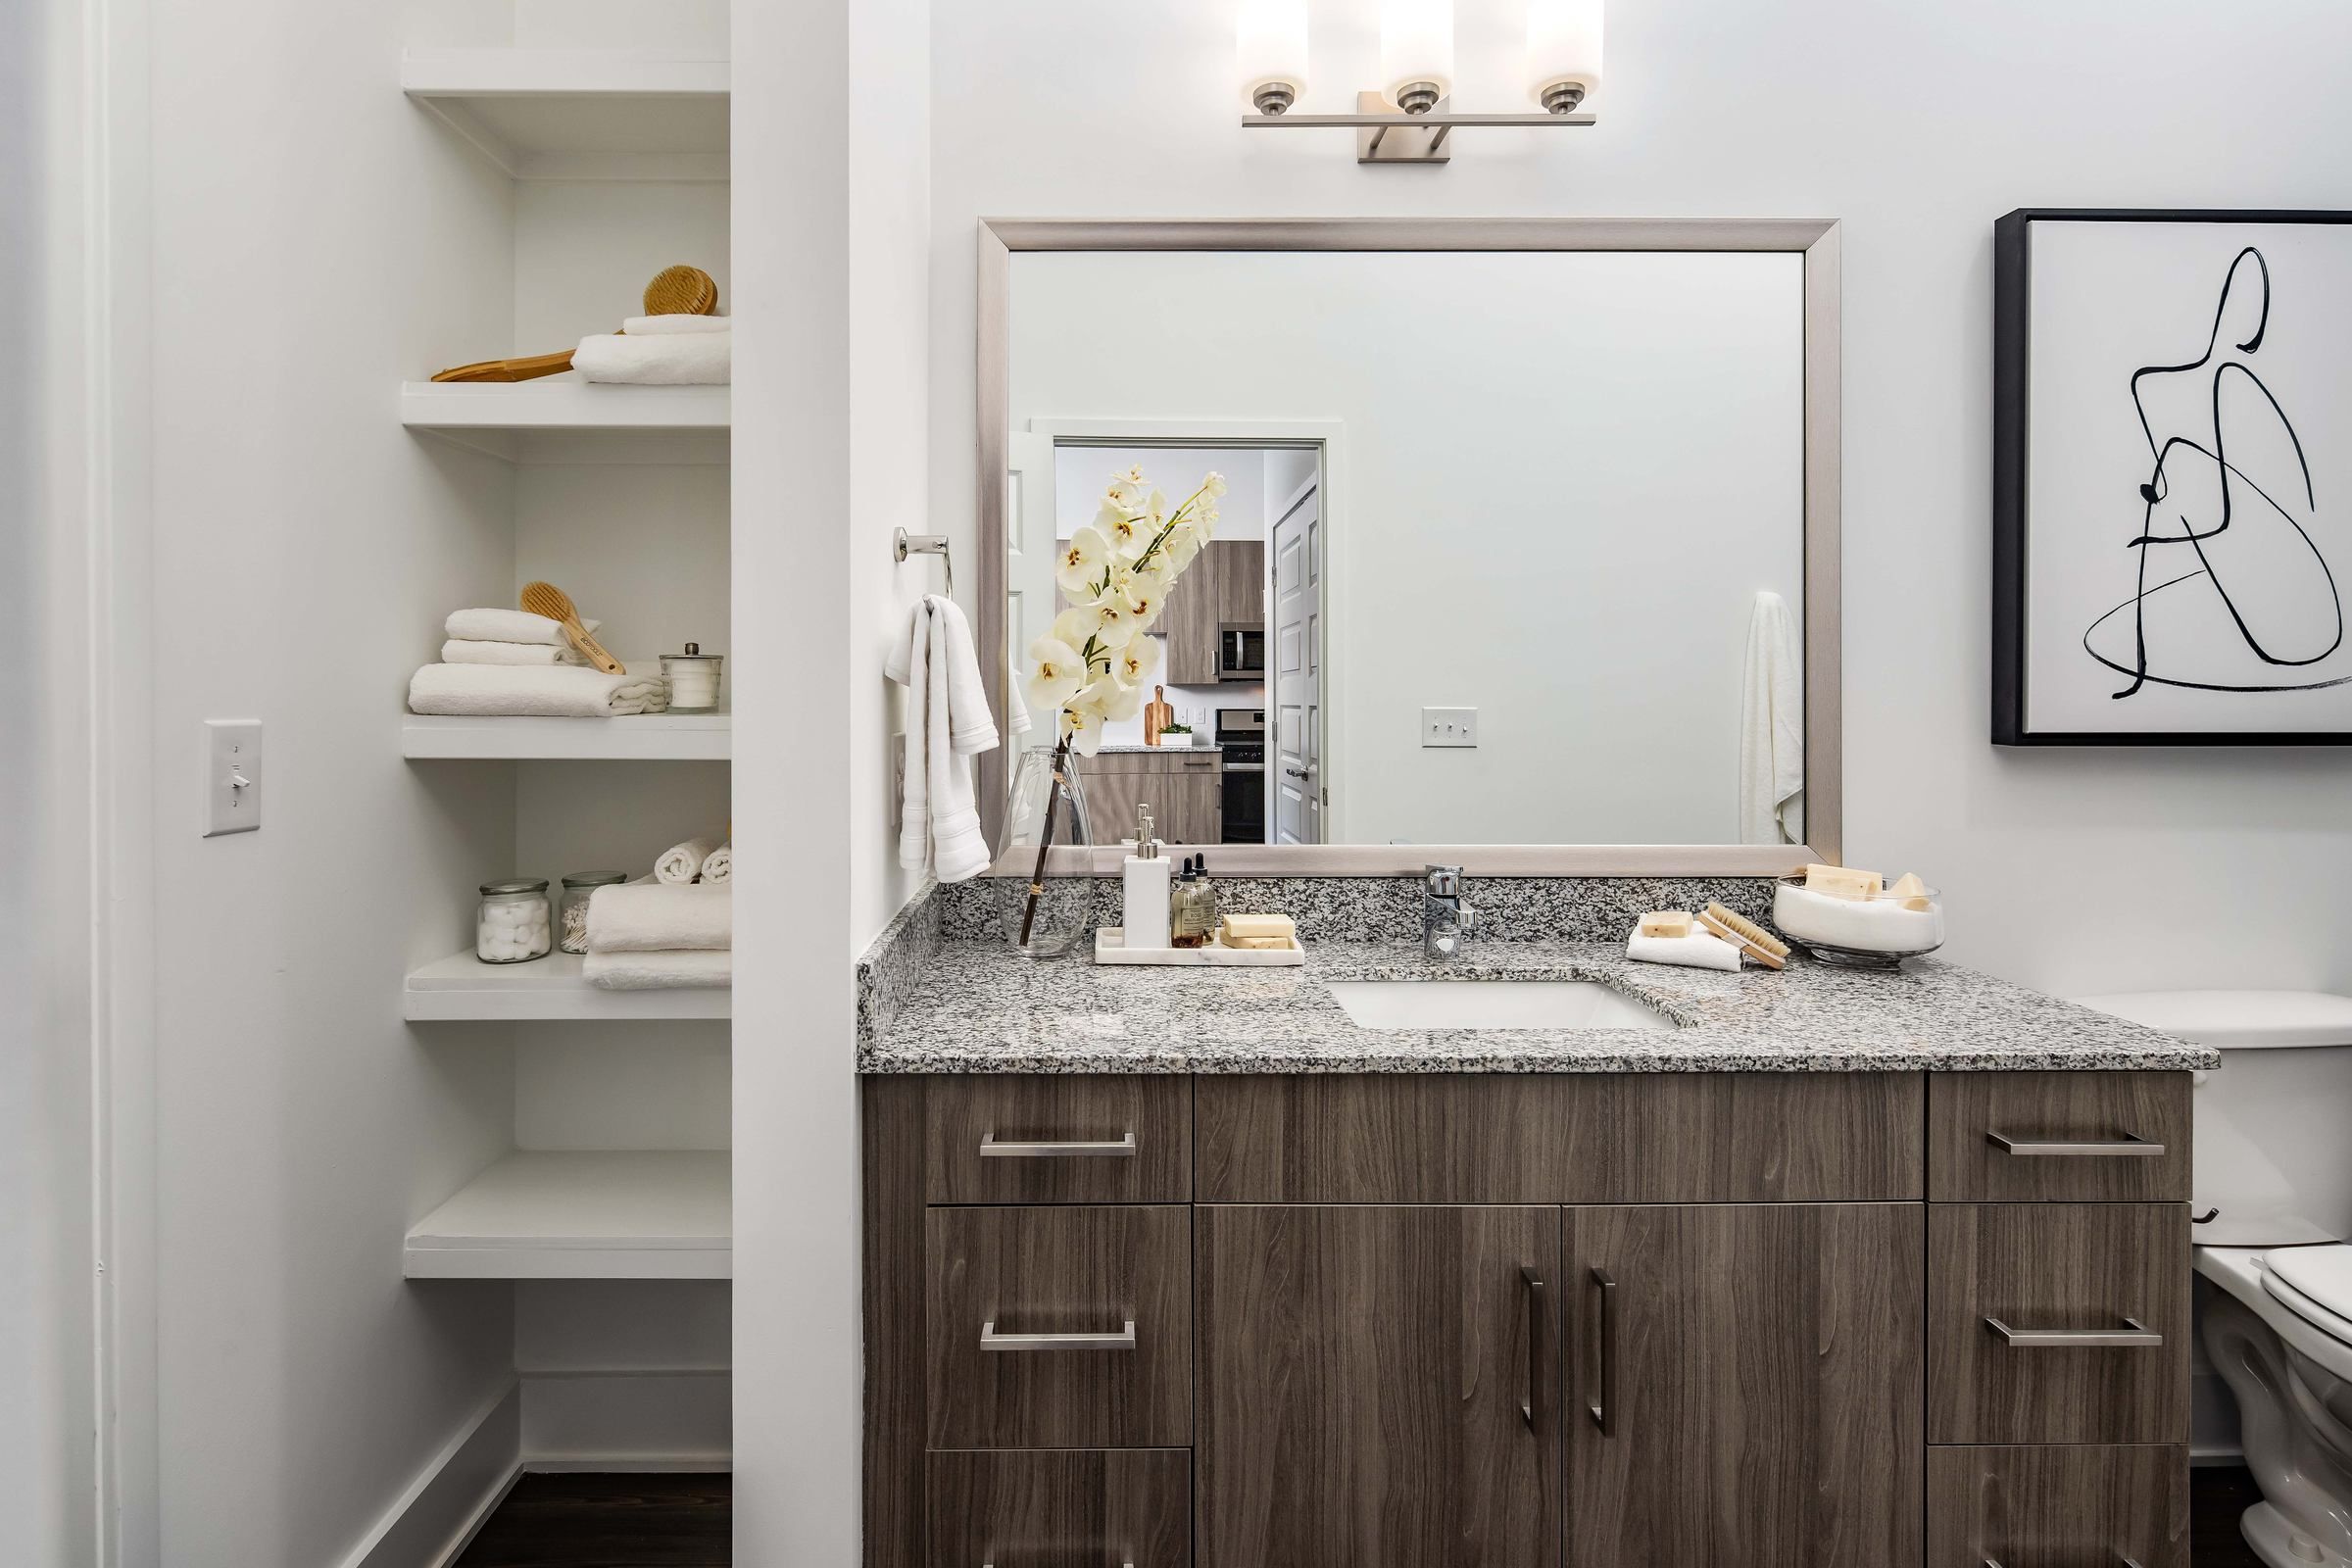 An inviting bathroom within Alta Ashley Park, with well-organized shelves, a spacious vanity area, and soft lighting that creates a warm ambiance.